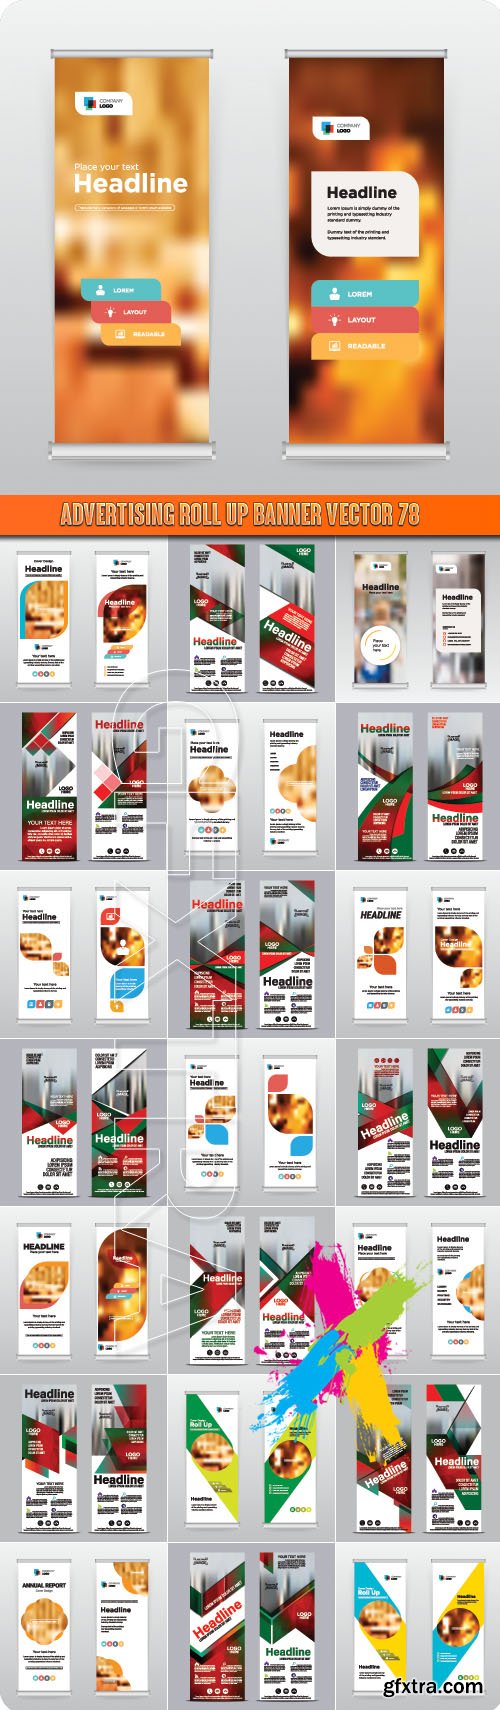 Advertising Roll up banner vector 78